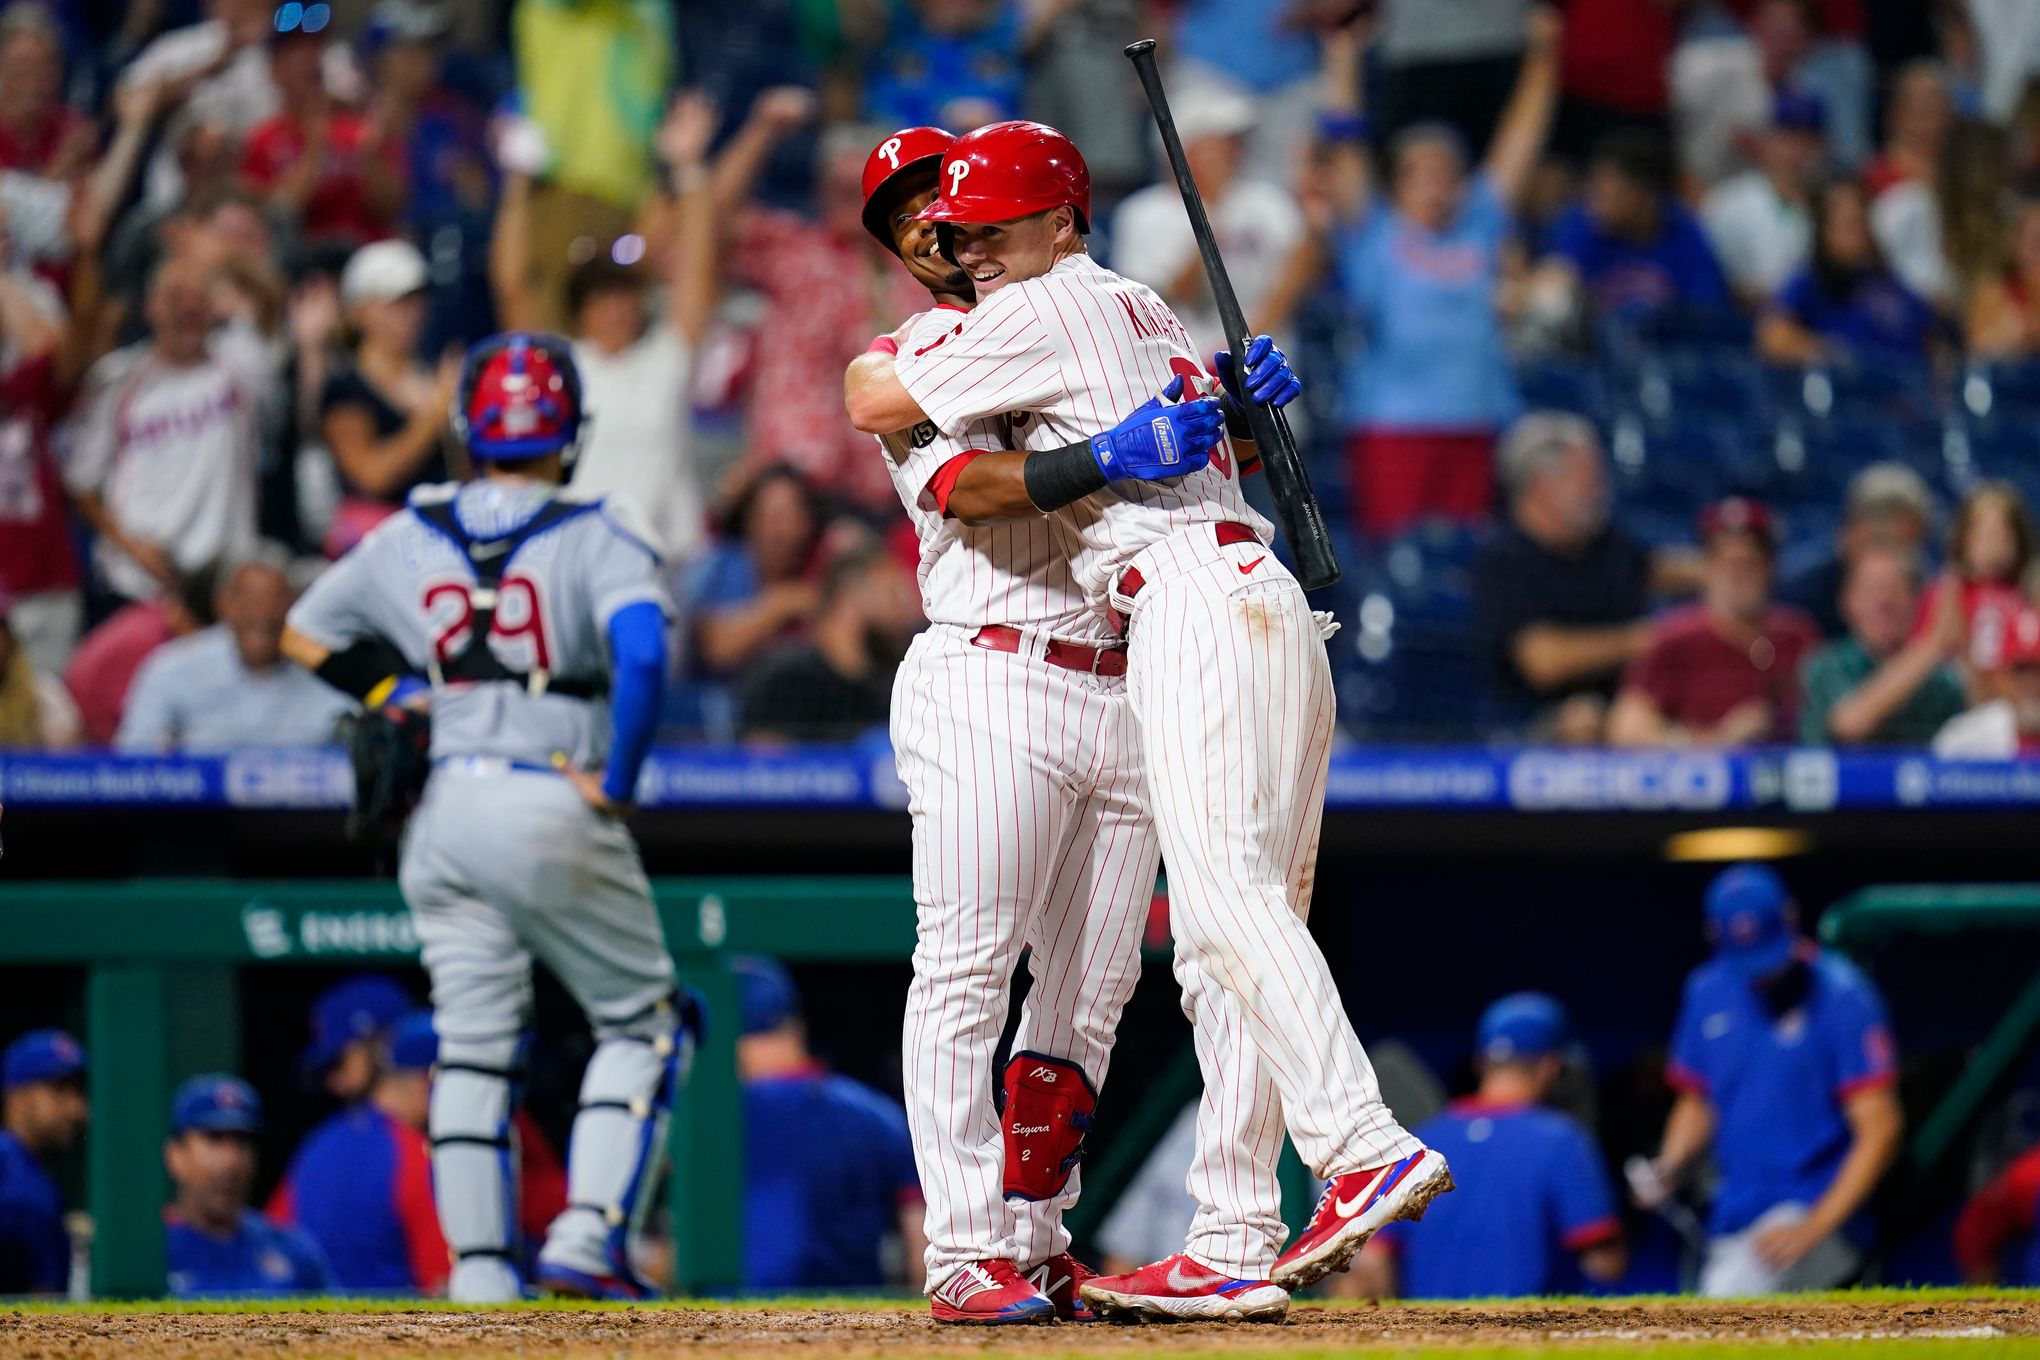 Phillies win wild one on passed ball in 9th; top Cubs 6-5